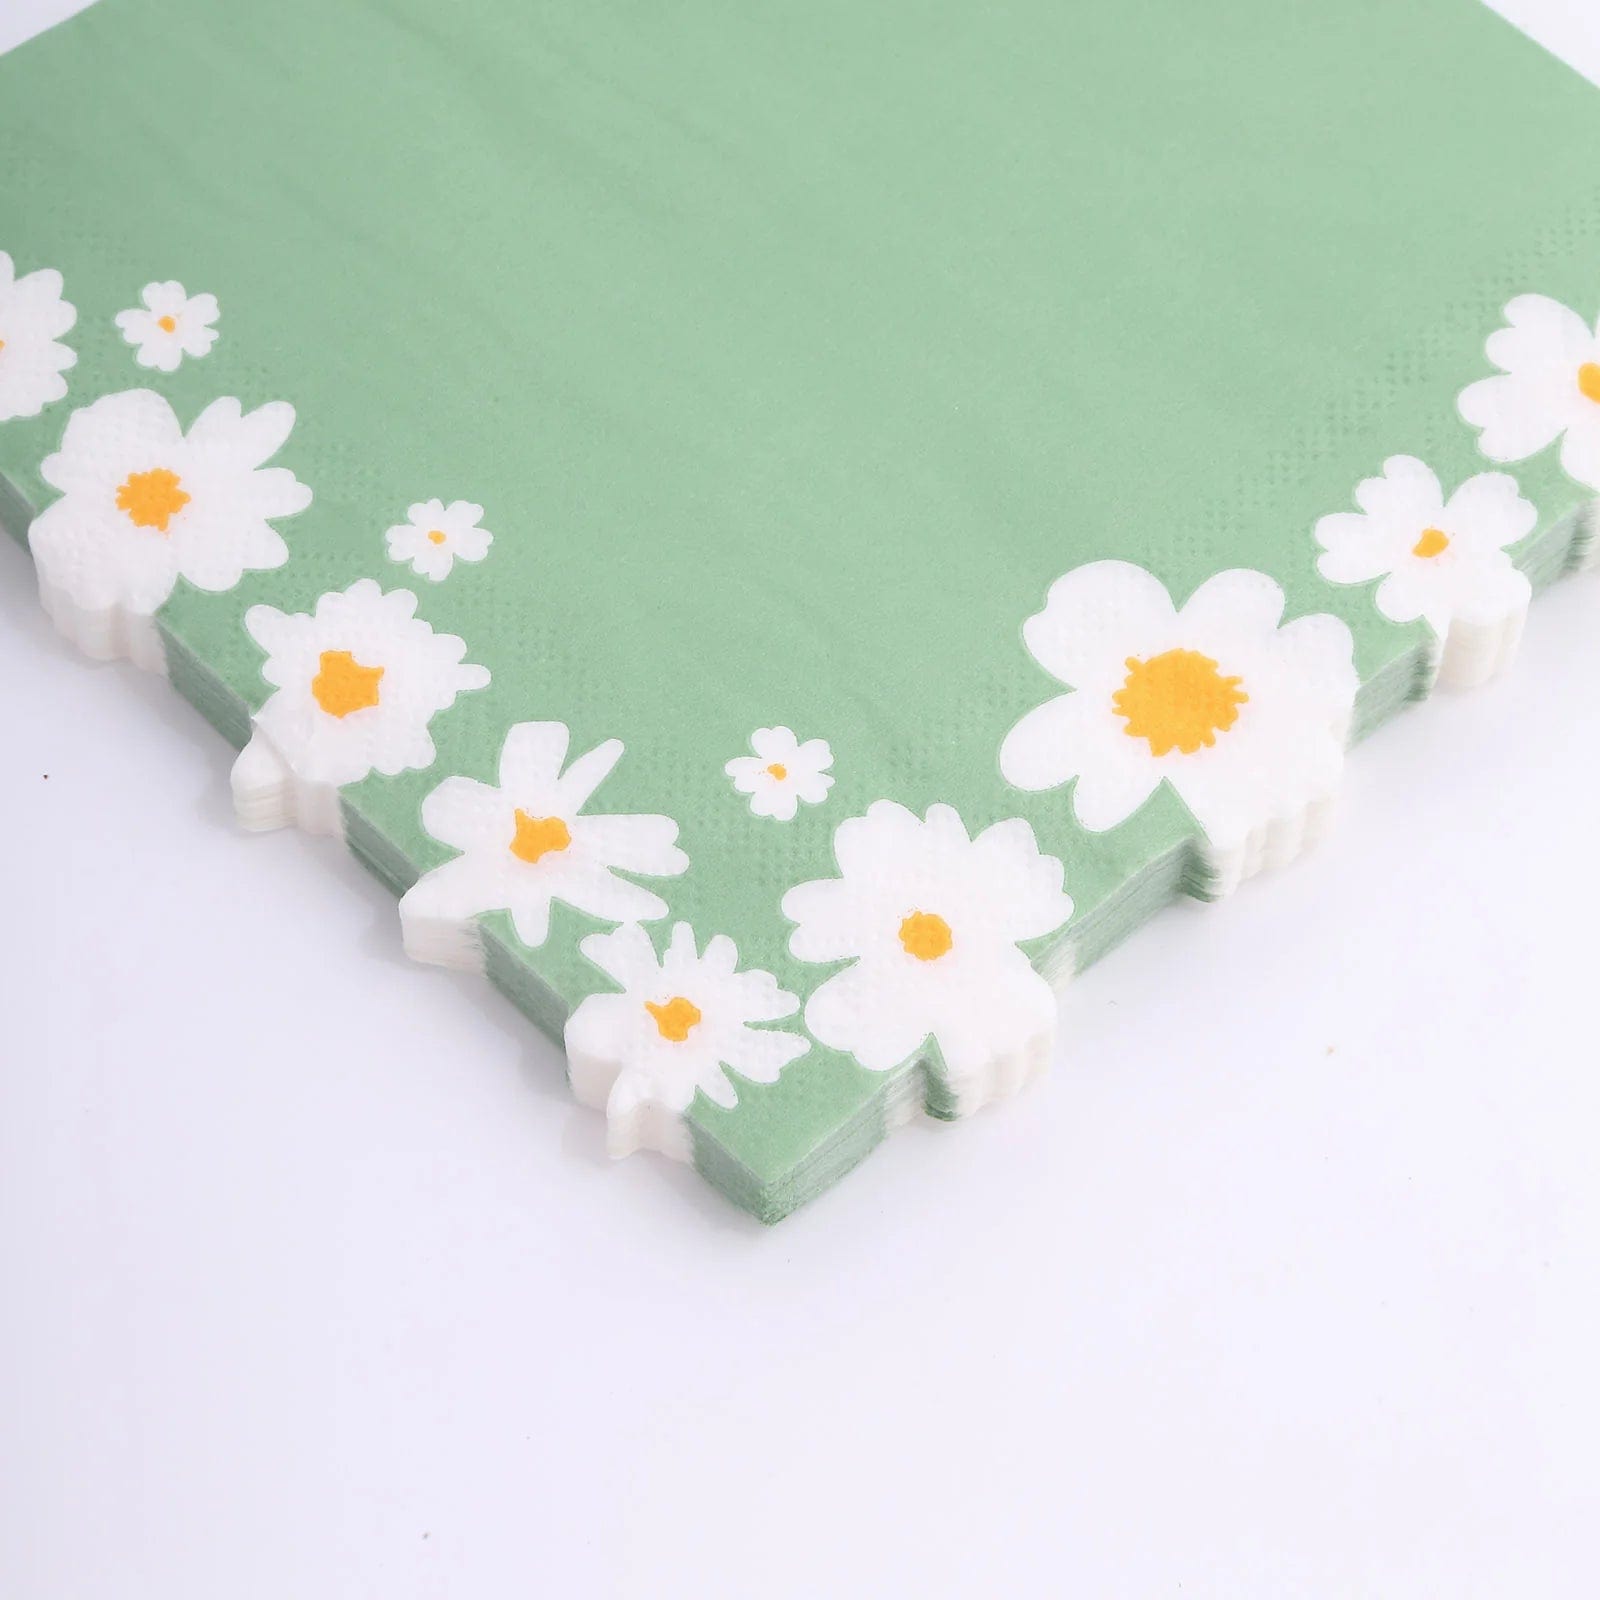 20 Sage Green 13x13 in Dinner Paper Napkins with Daisy Flower Design